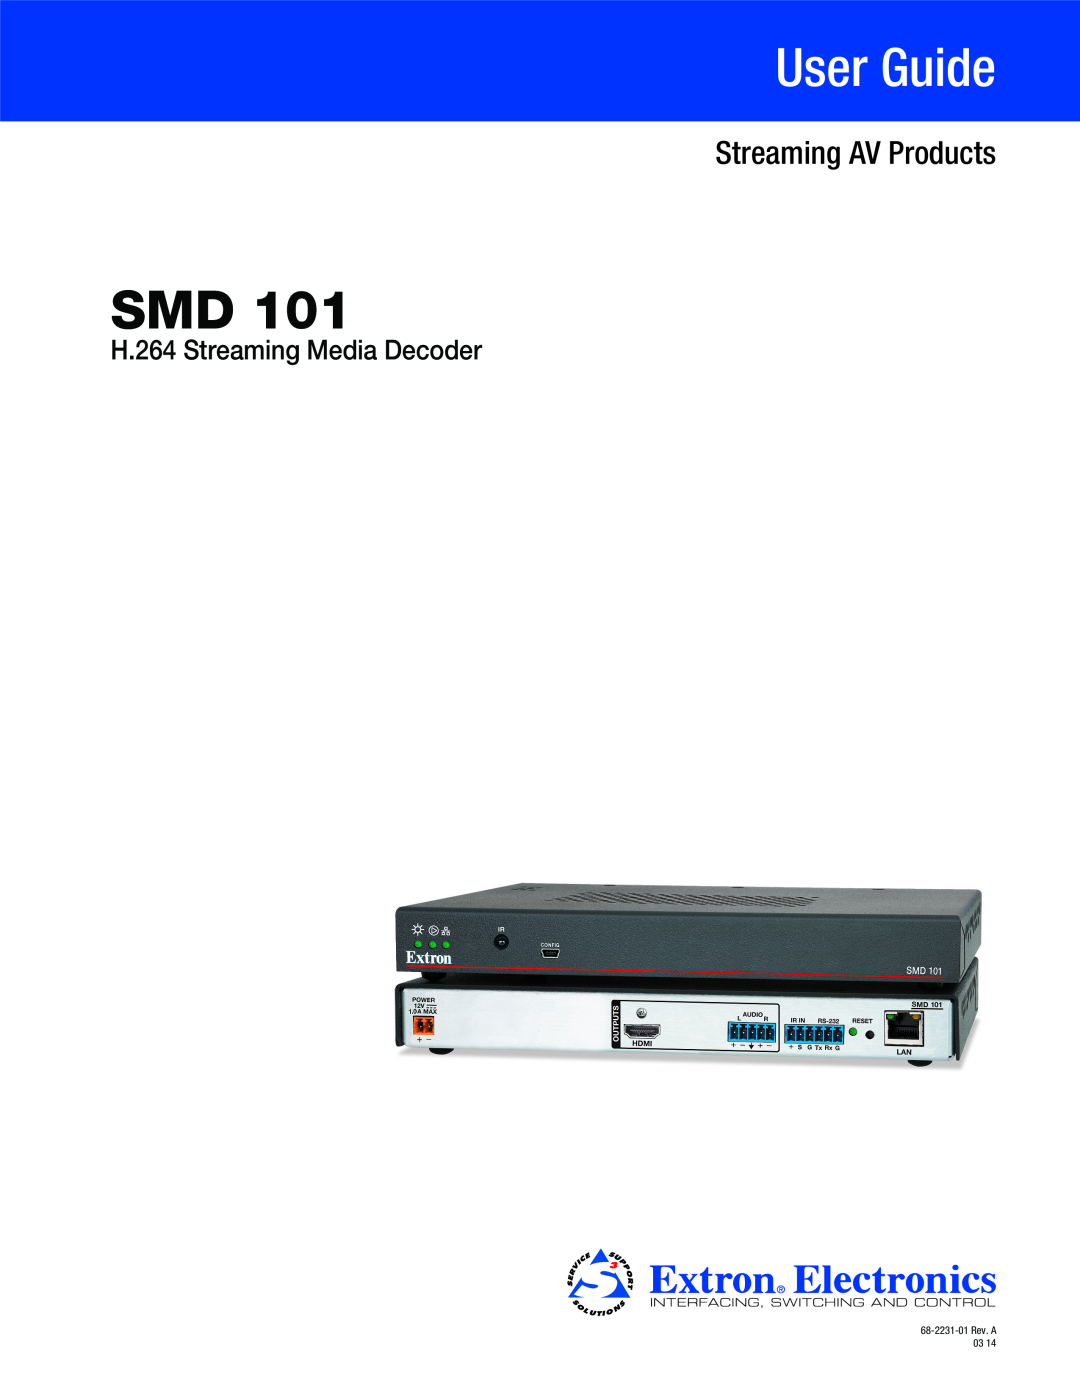 Extron electronic SMD 101 manual Streaming AV Products, User Guide, H.264 Streaming Media Decoder 